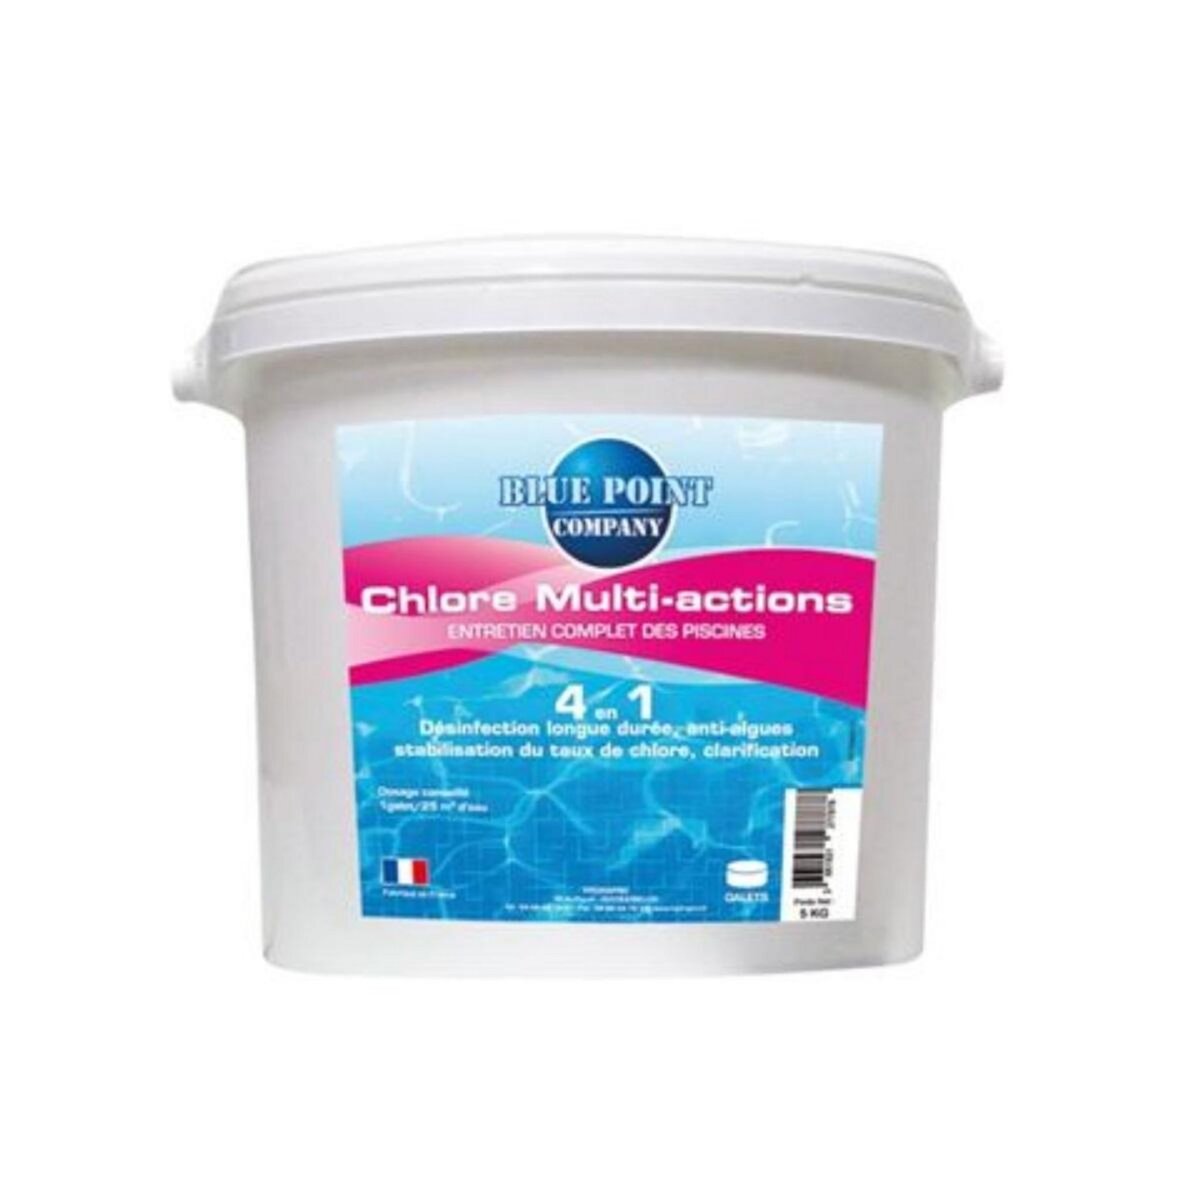 Blue point company Chlore multi-fonctions galet 250g 5kg - 6201902